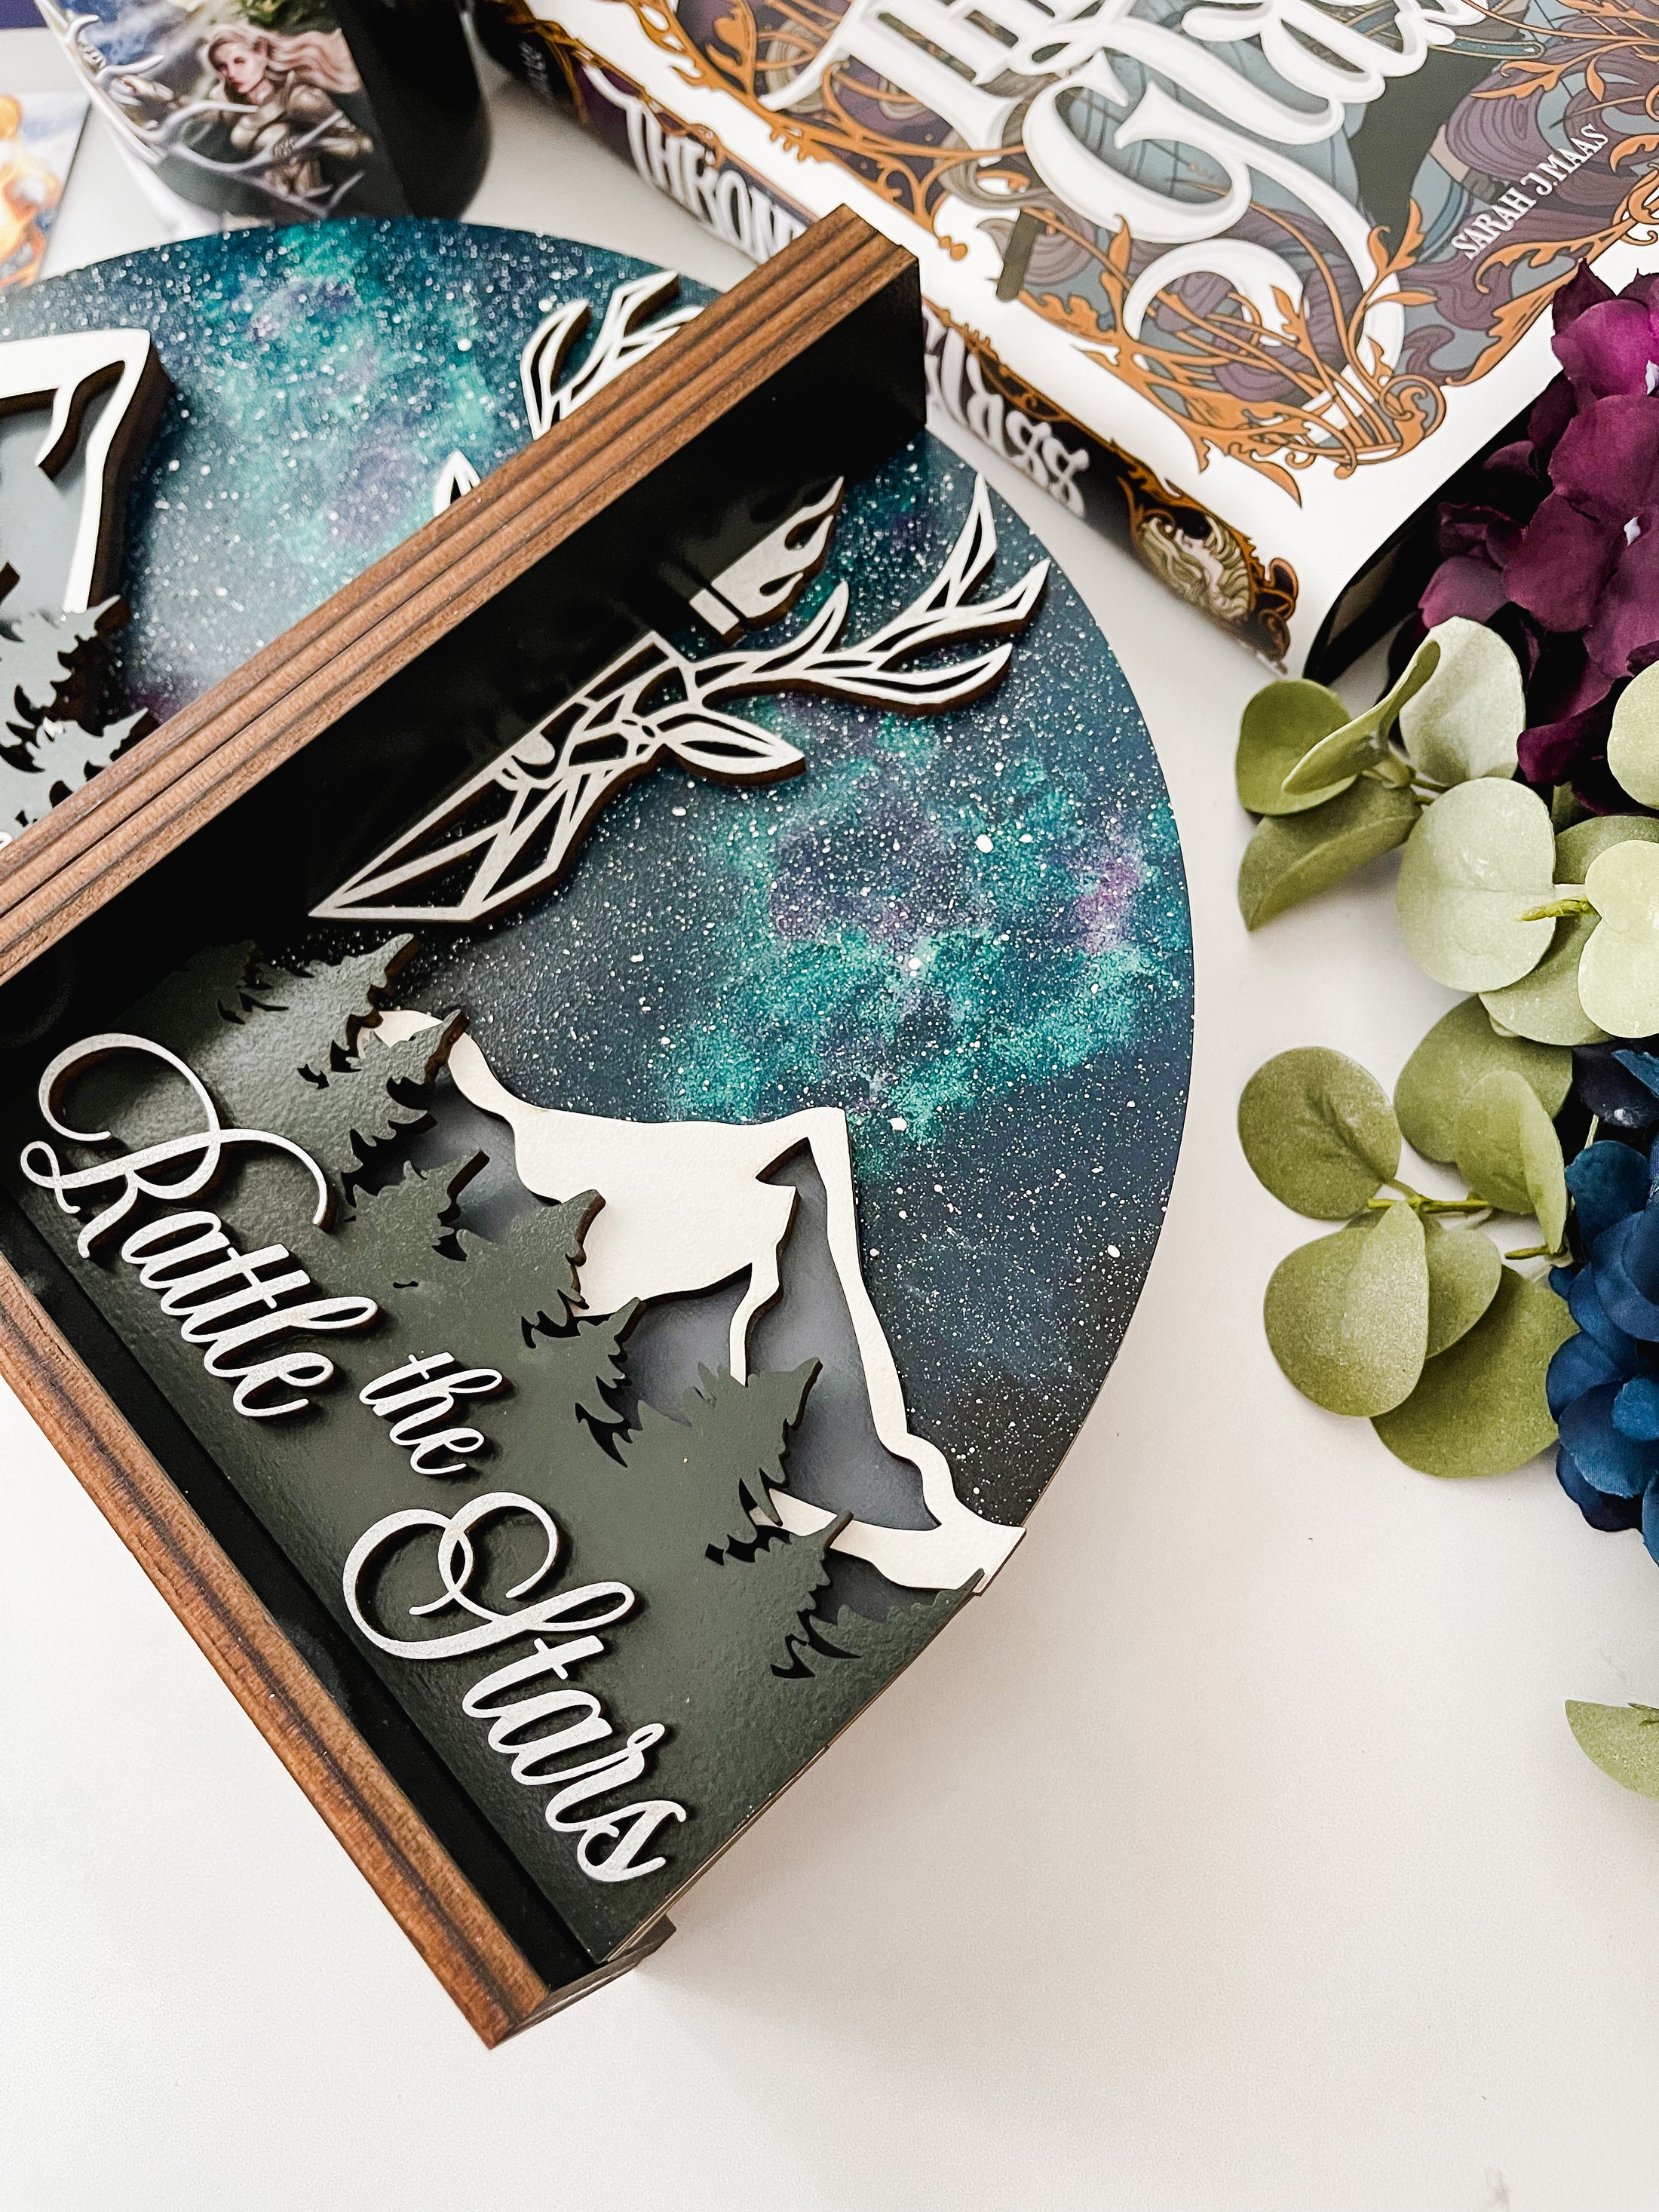 Throne of Glass Bookends - firedrakeartistry